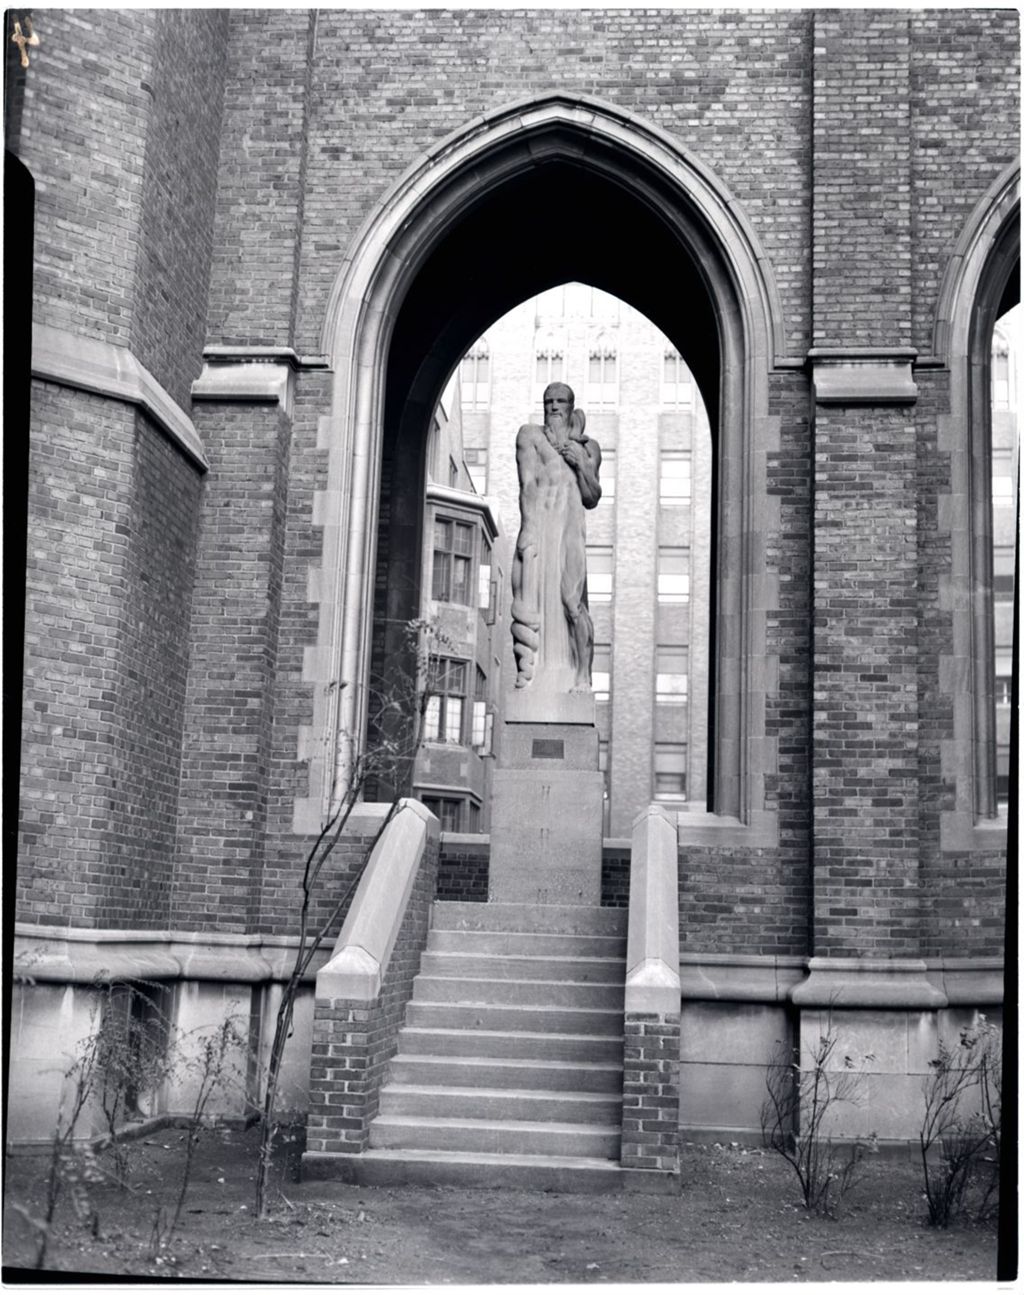 Statue in Arched Walkway, University of Illinois Medical School